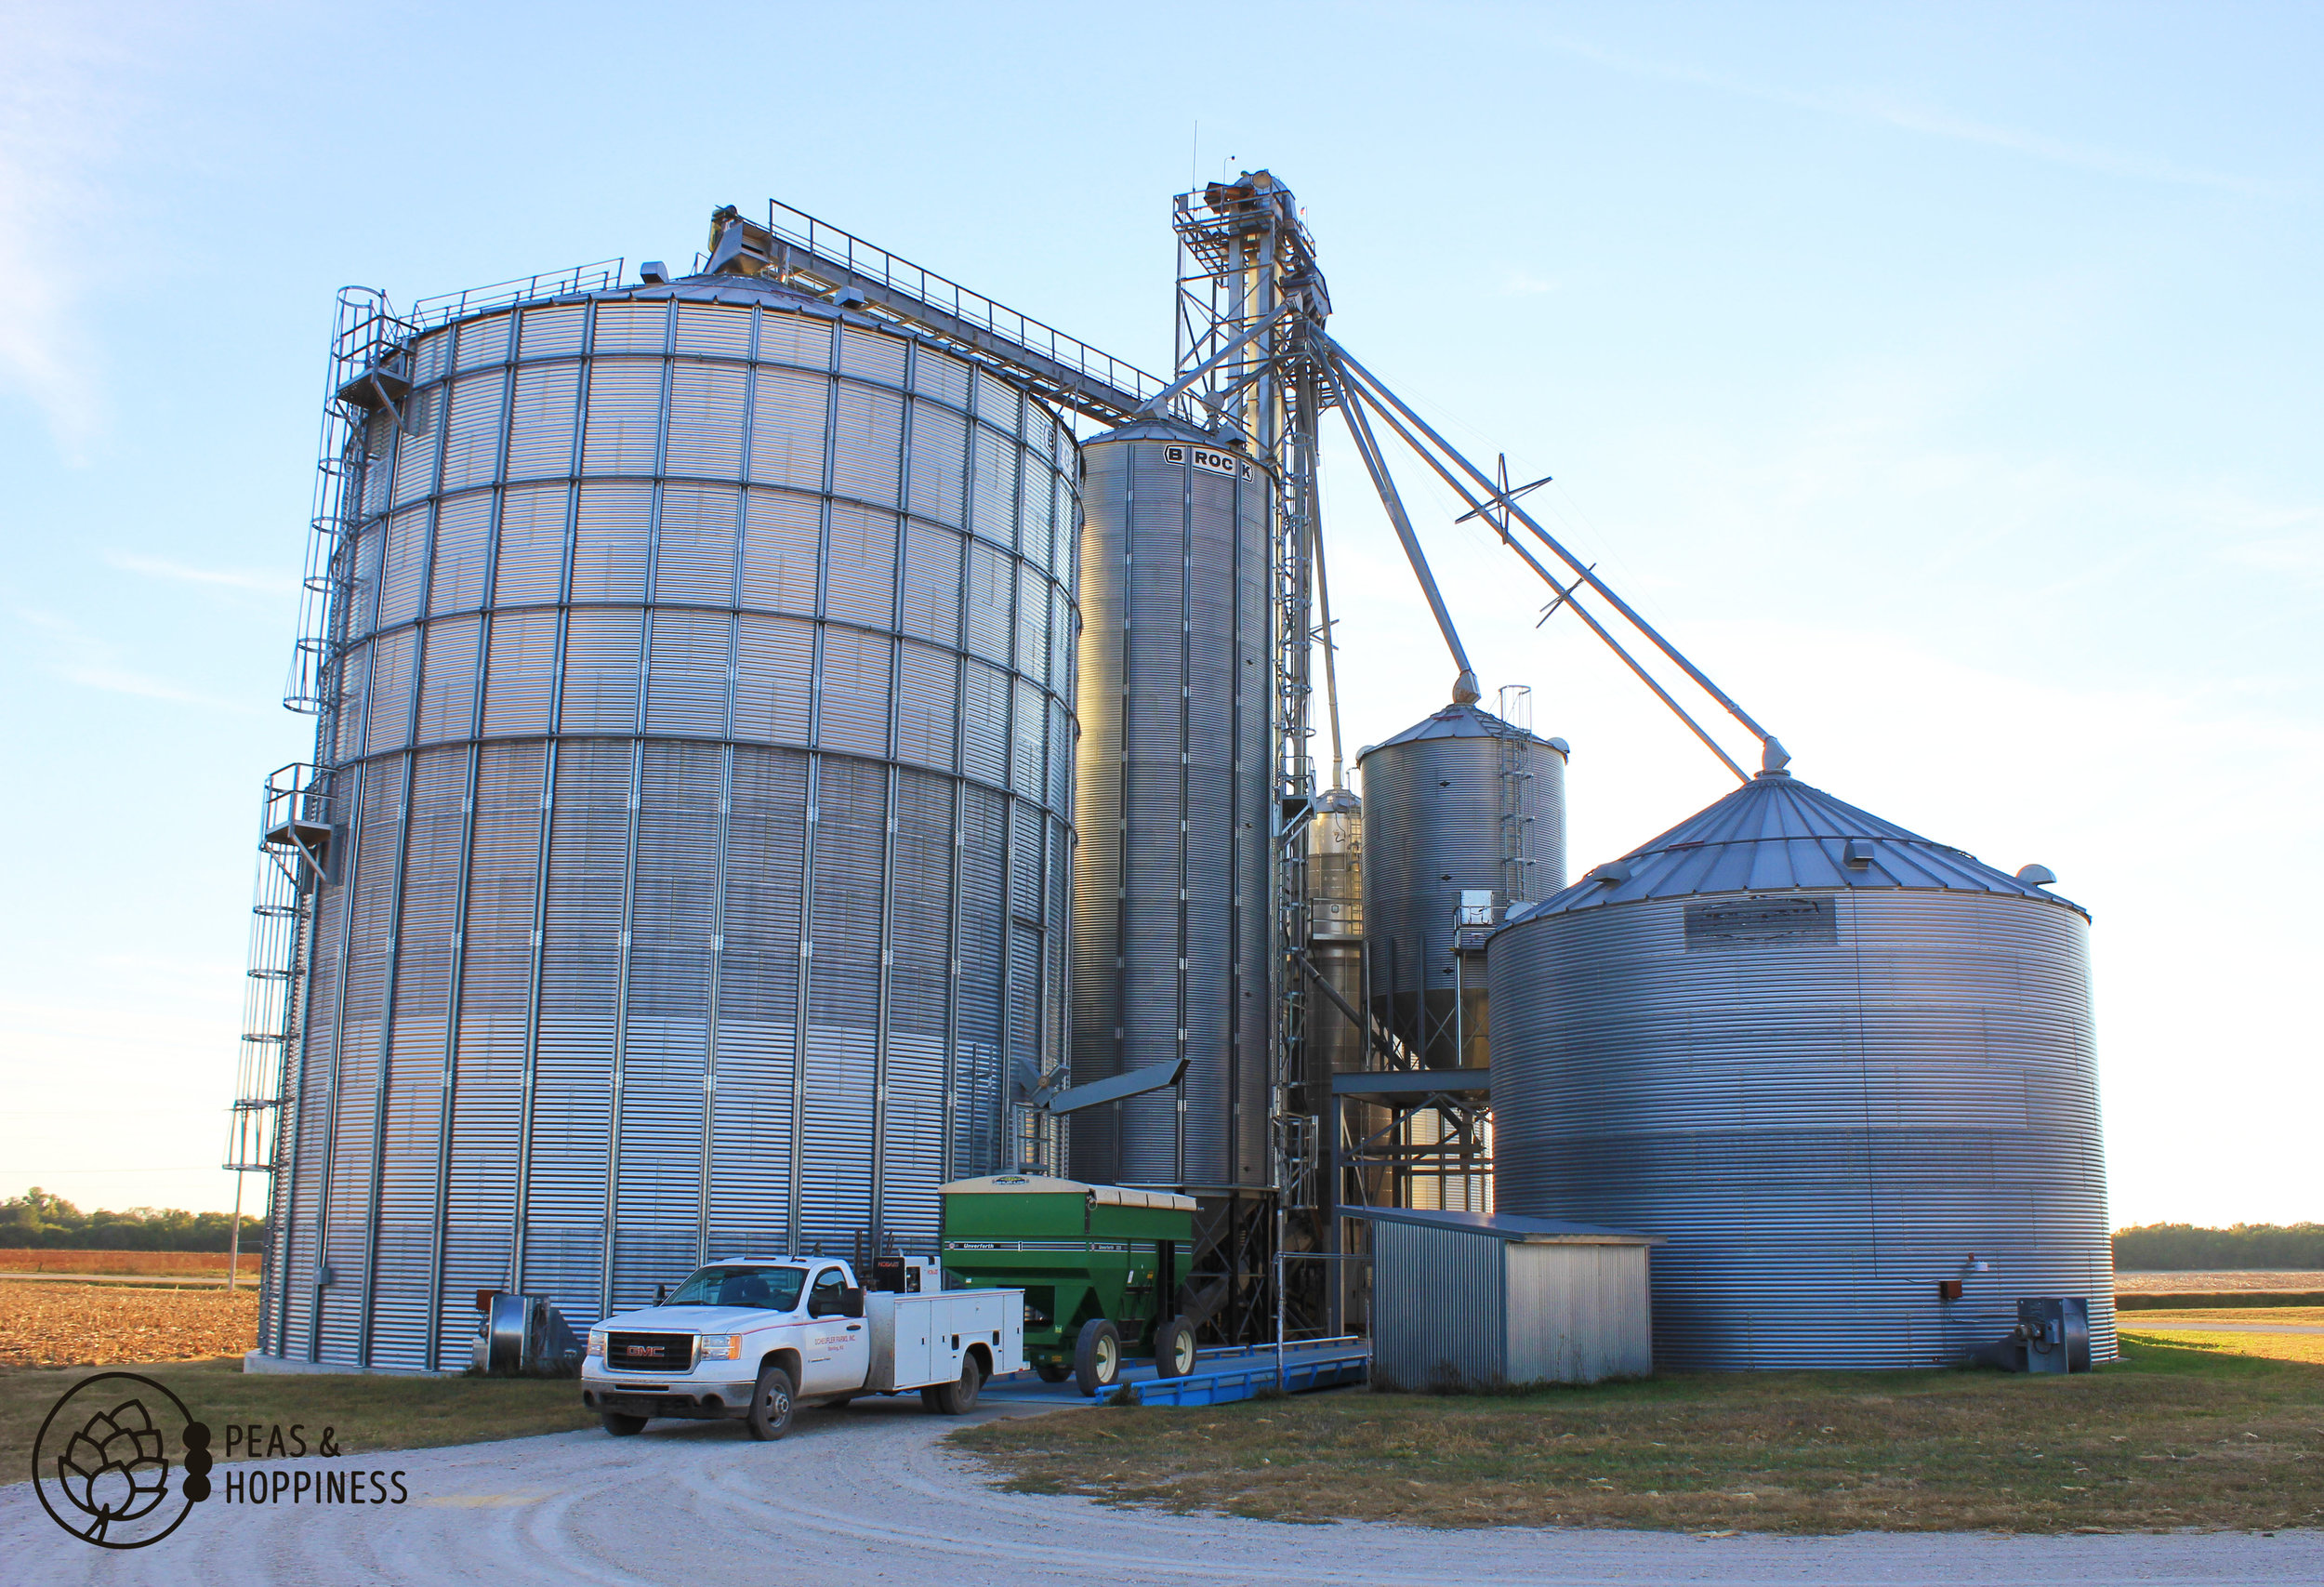 On-farm grain storage that allows quick emptying of trucks during harvest (no waiting in line!) and the ability to hold grain until prices climb in the off-season